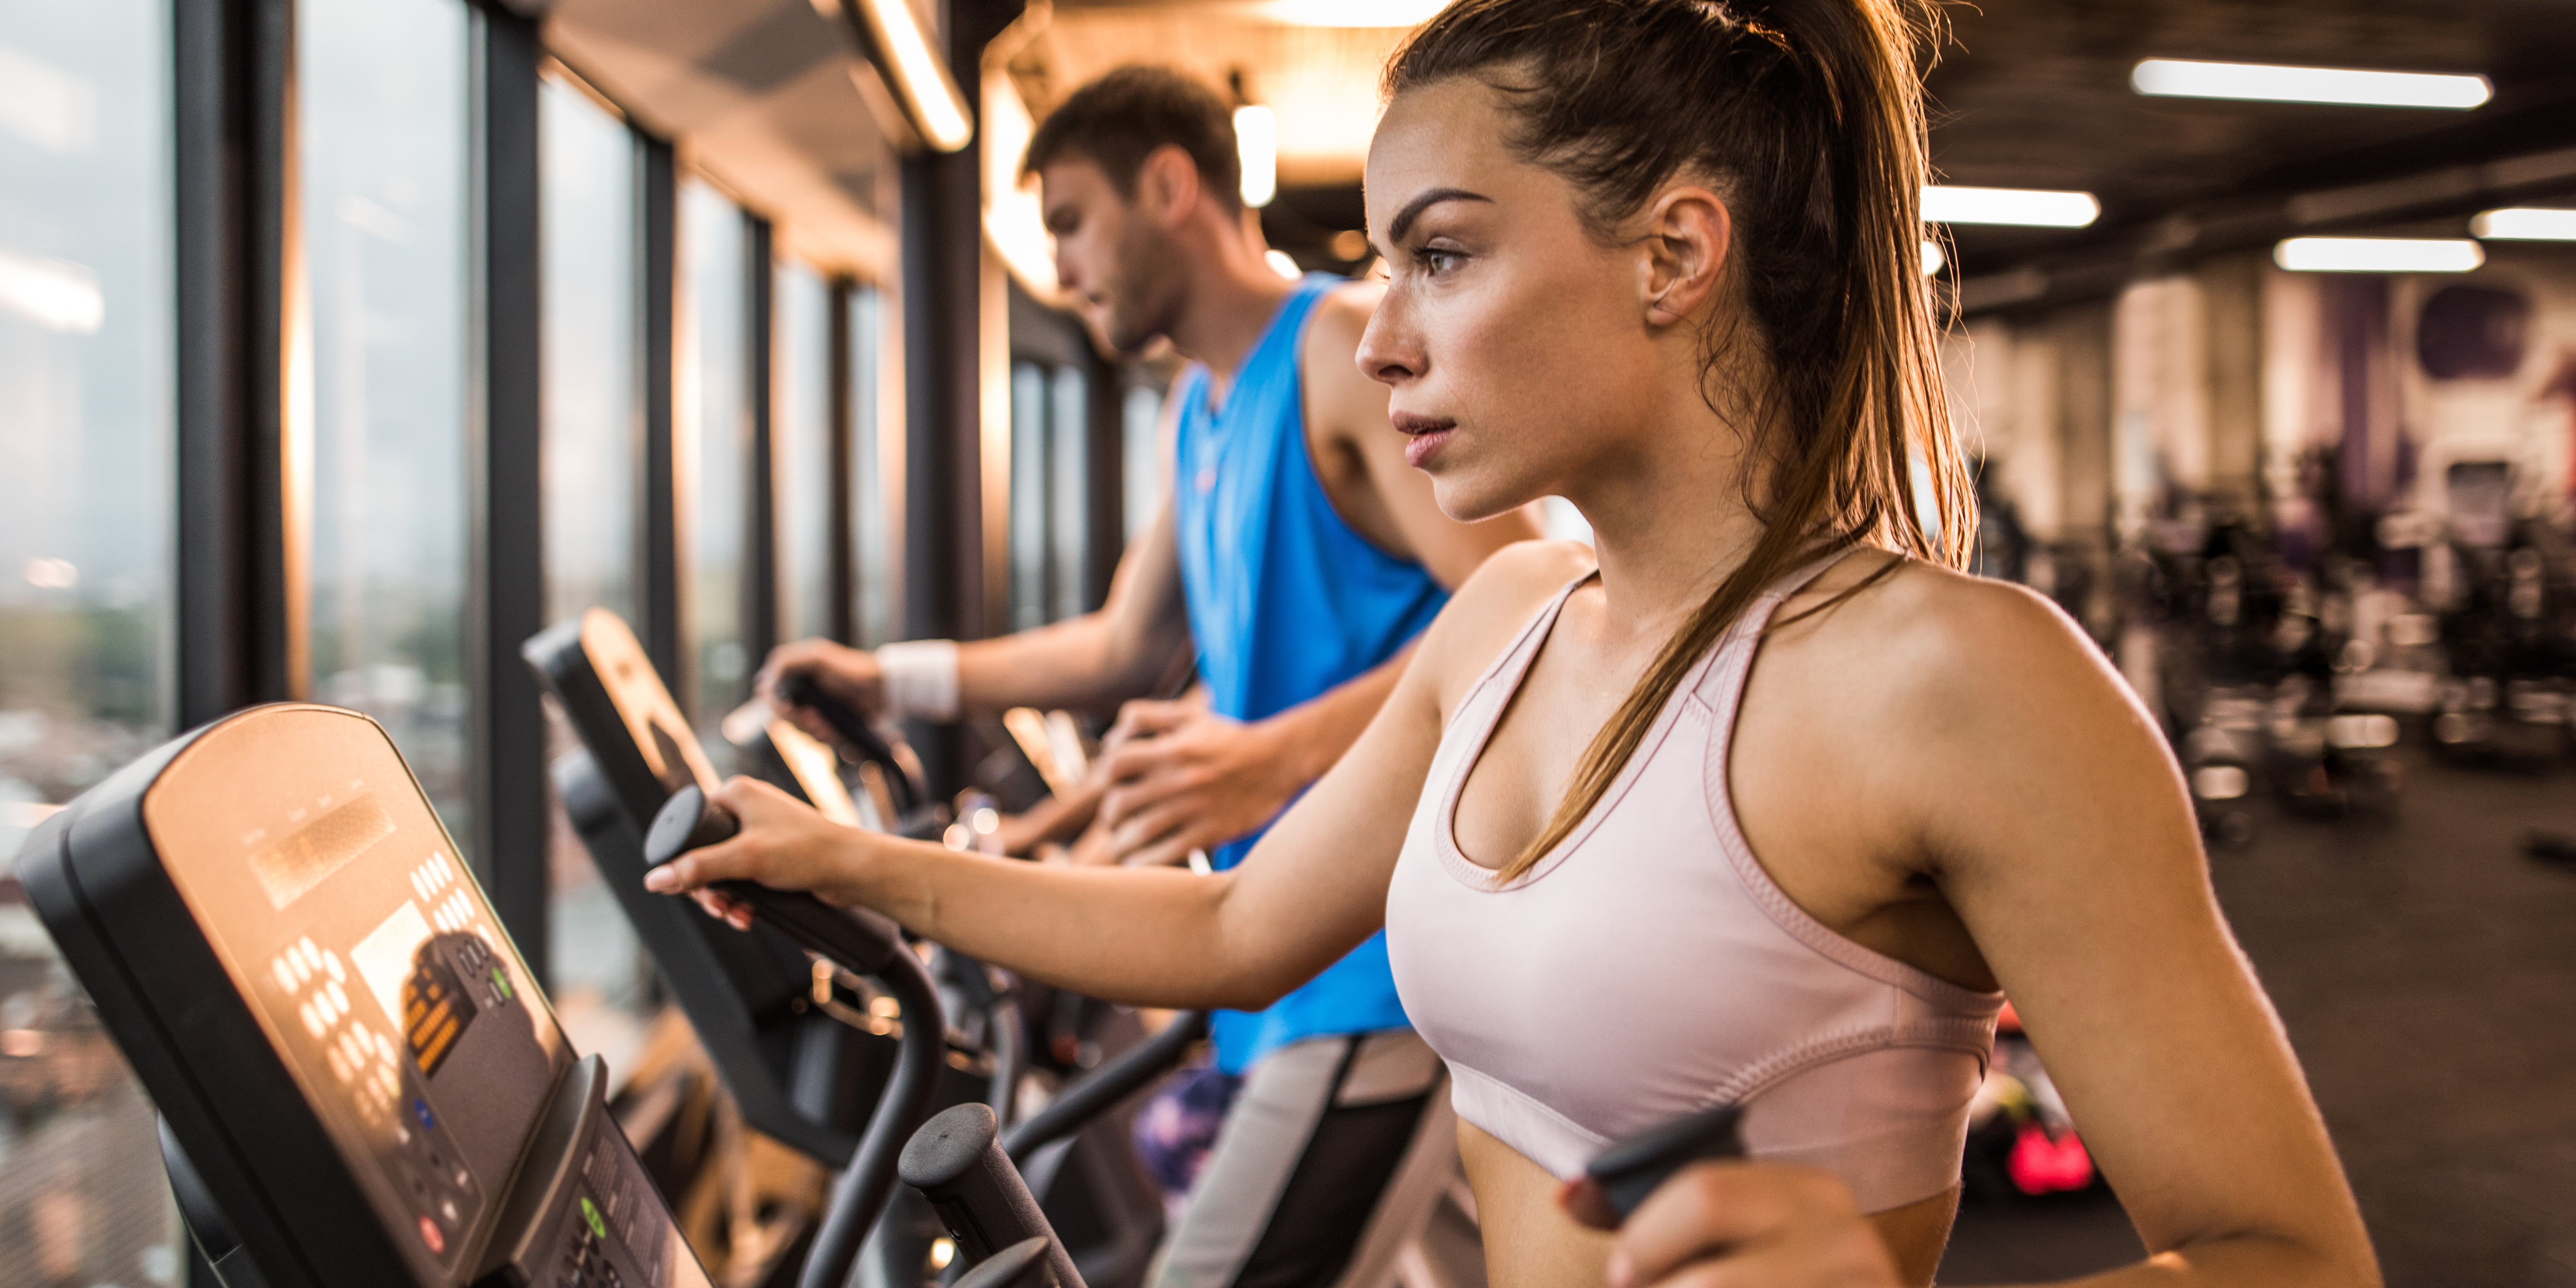 The Most Common Mistakes You Make on the Elliptical